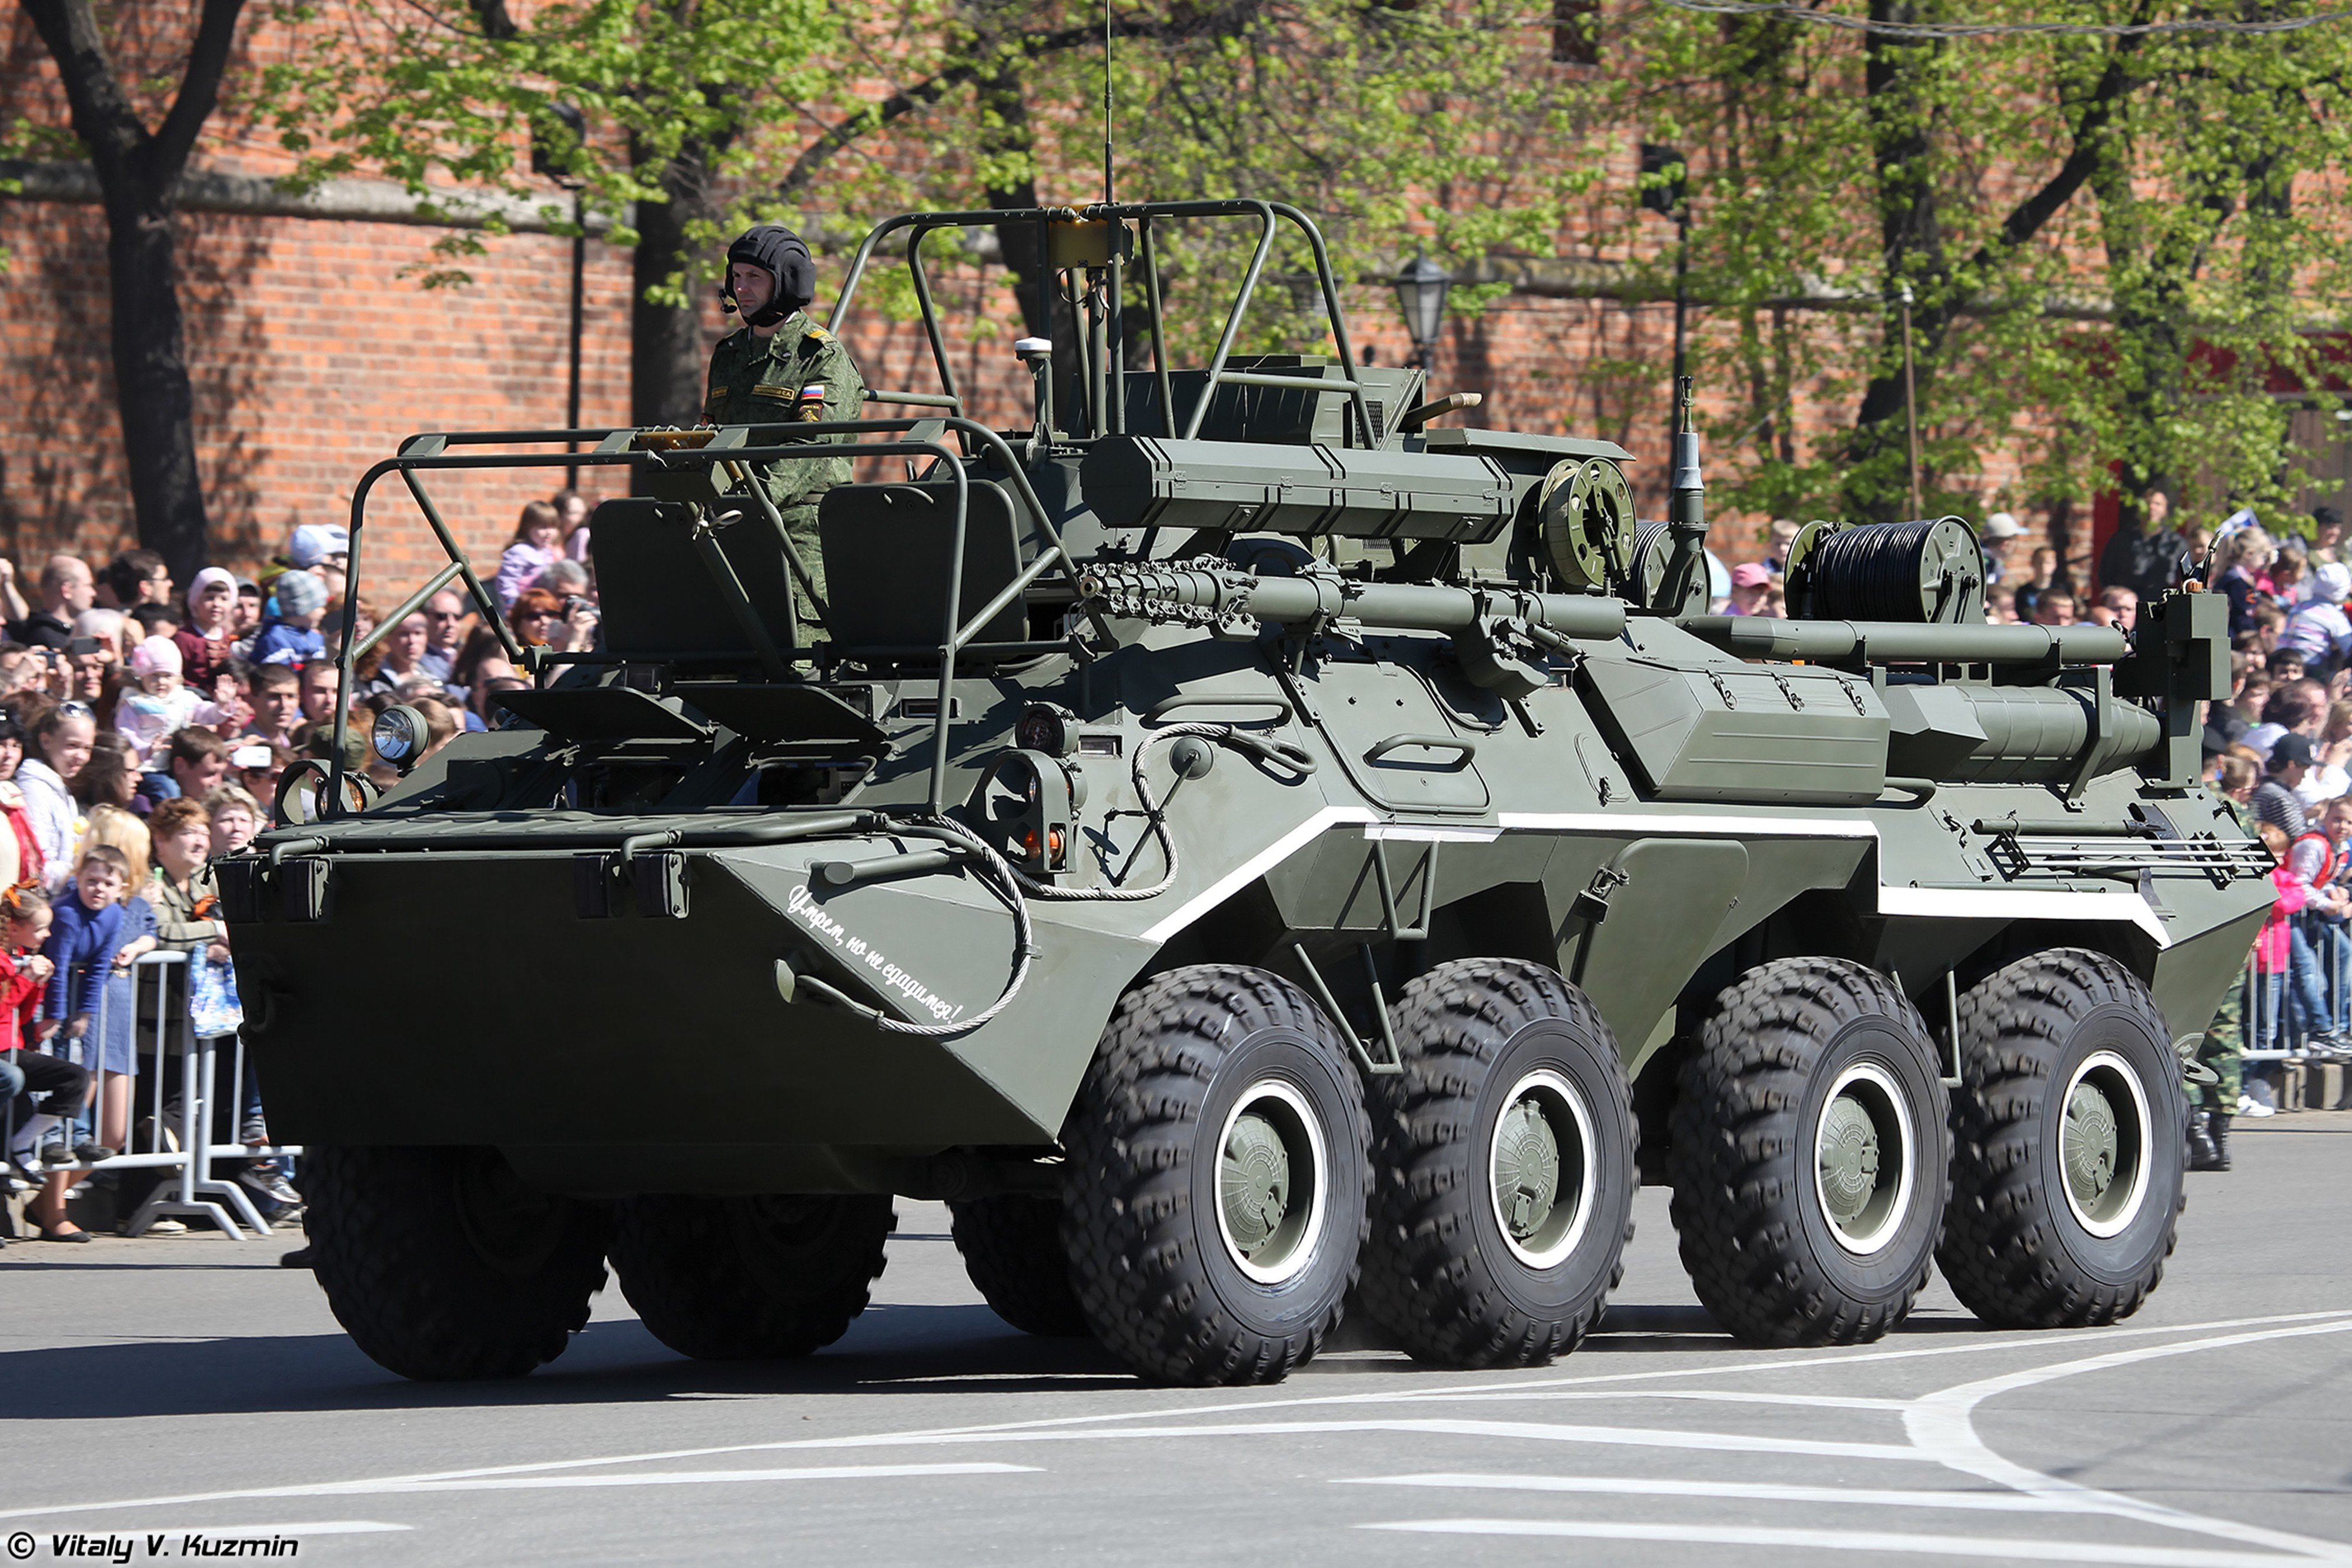 2014, Victory, Day, Parade in nizhny novgorod, Russia, Military, Russian, Army, Red star, Armored, R 166 0, 5, Signal, Vehicle, On, K1sh1, Base, 2, 4000x2667 Wallpaper